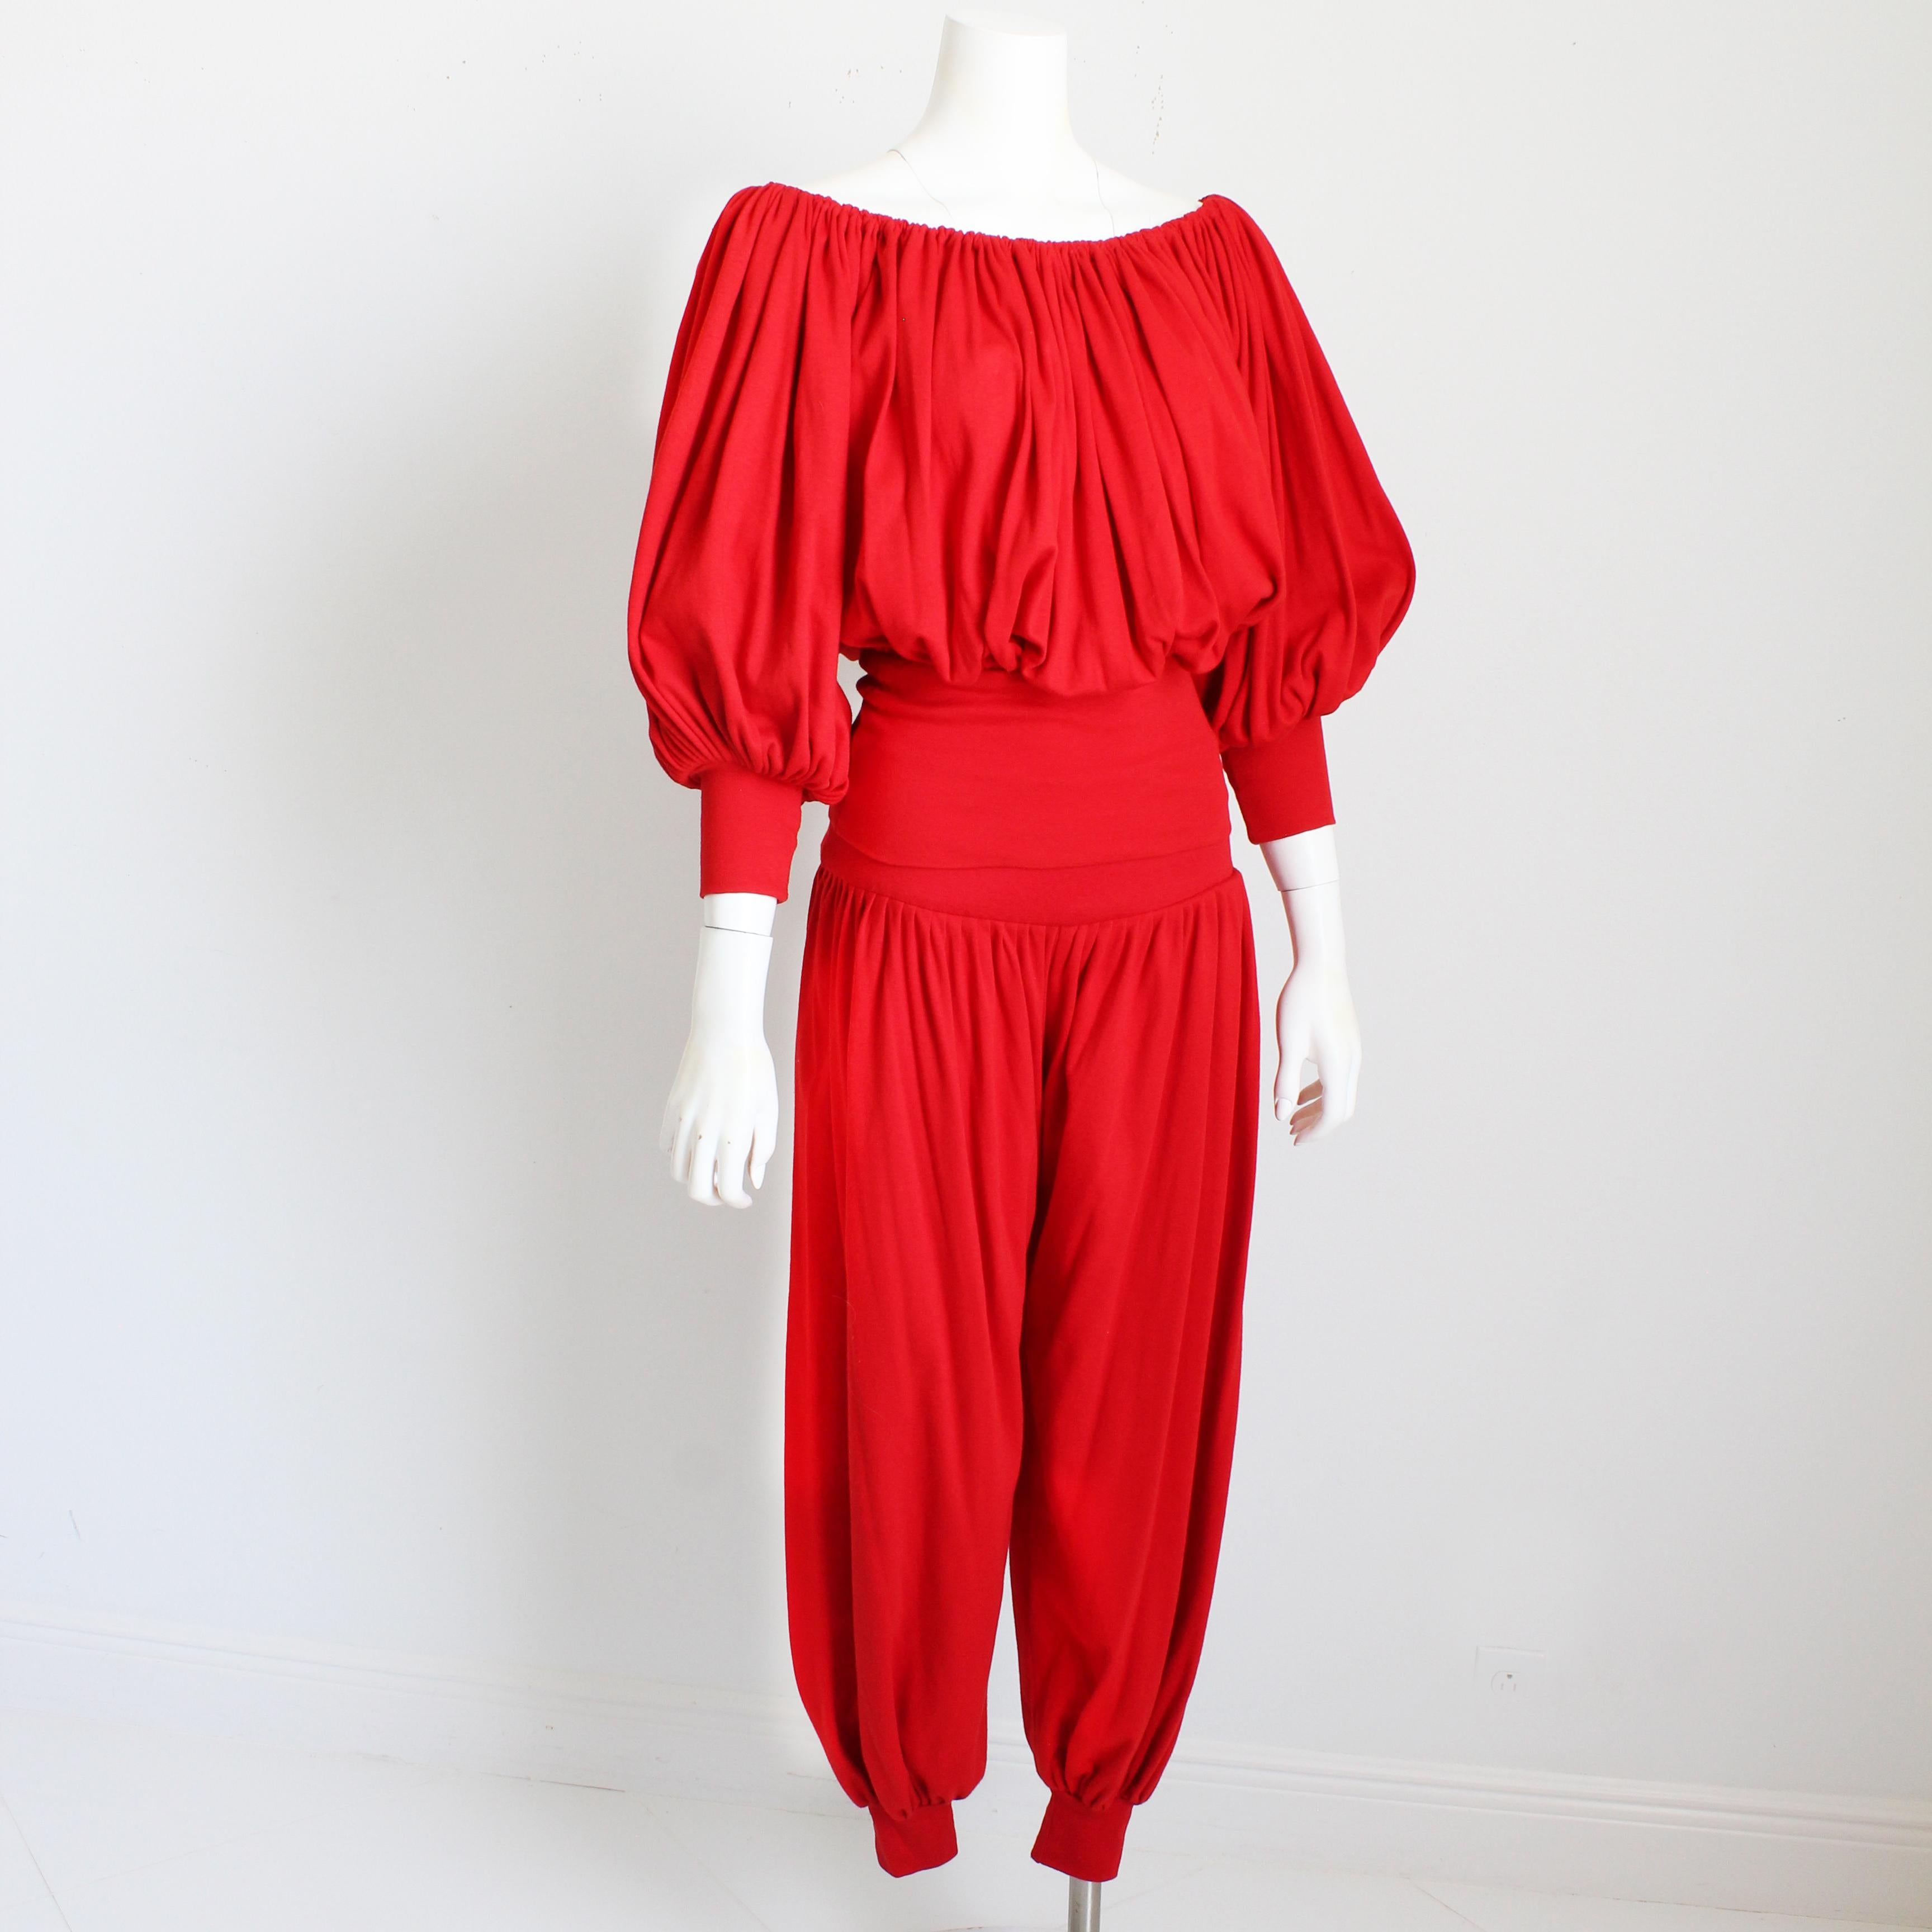 Preowned, vintage and incredibly rare Norma Kamali off shoulder top and harem pants set, likely made in the early 1980s.  This two-piece set includes an elasticized top, which can be worn on or off the shoulders and a pair of matching harem pants. 